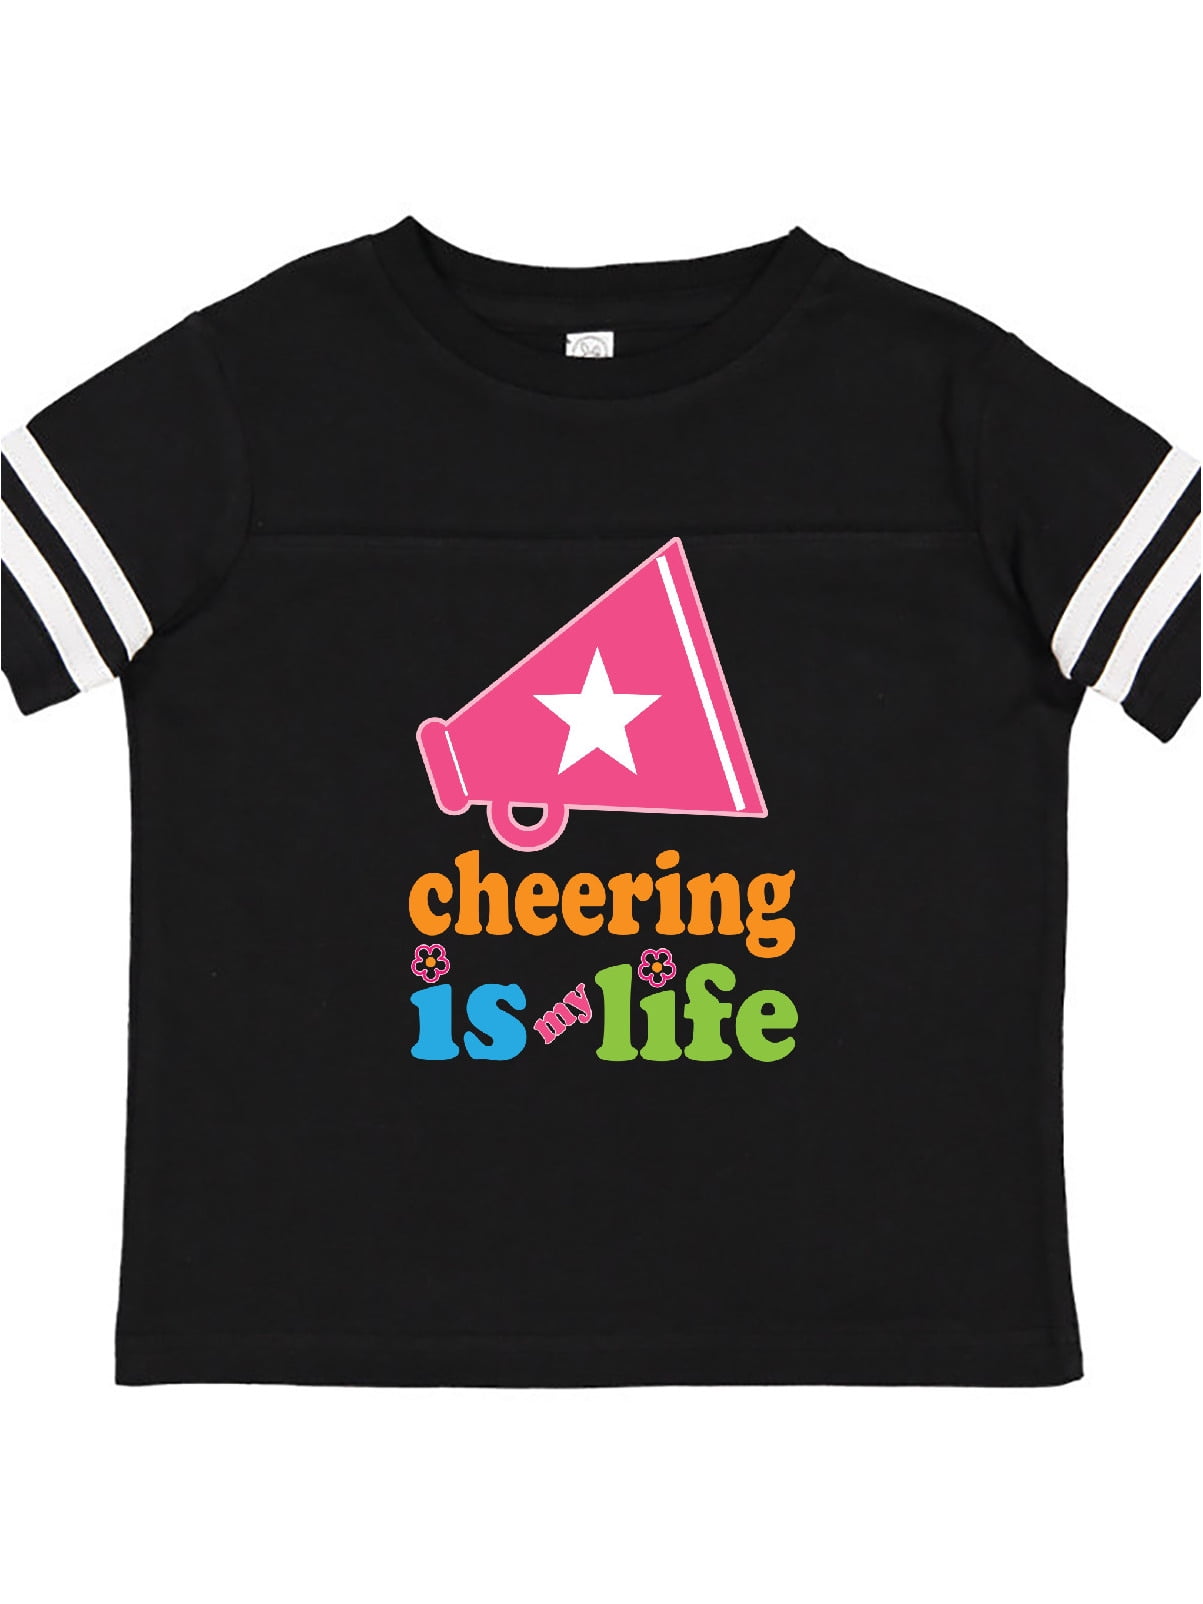 Cheer Girls T Shirt Infant Toddler Cheerleader Cheerleading squad Kids Personalized Child Childrens Clothing Clothes humor top Tshirt gift